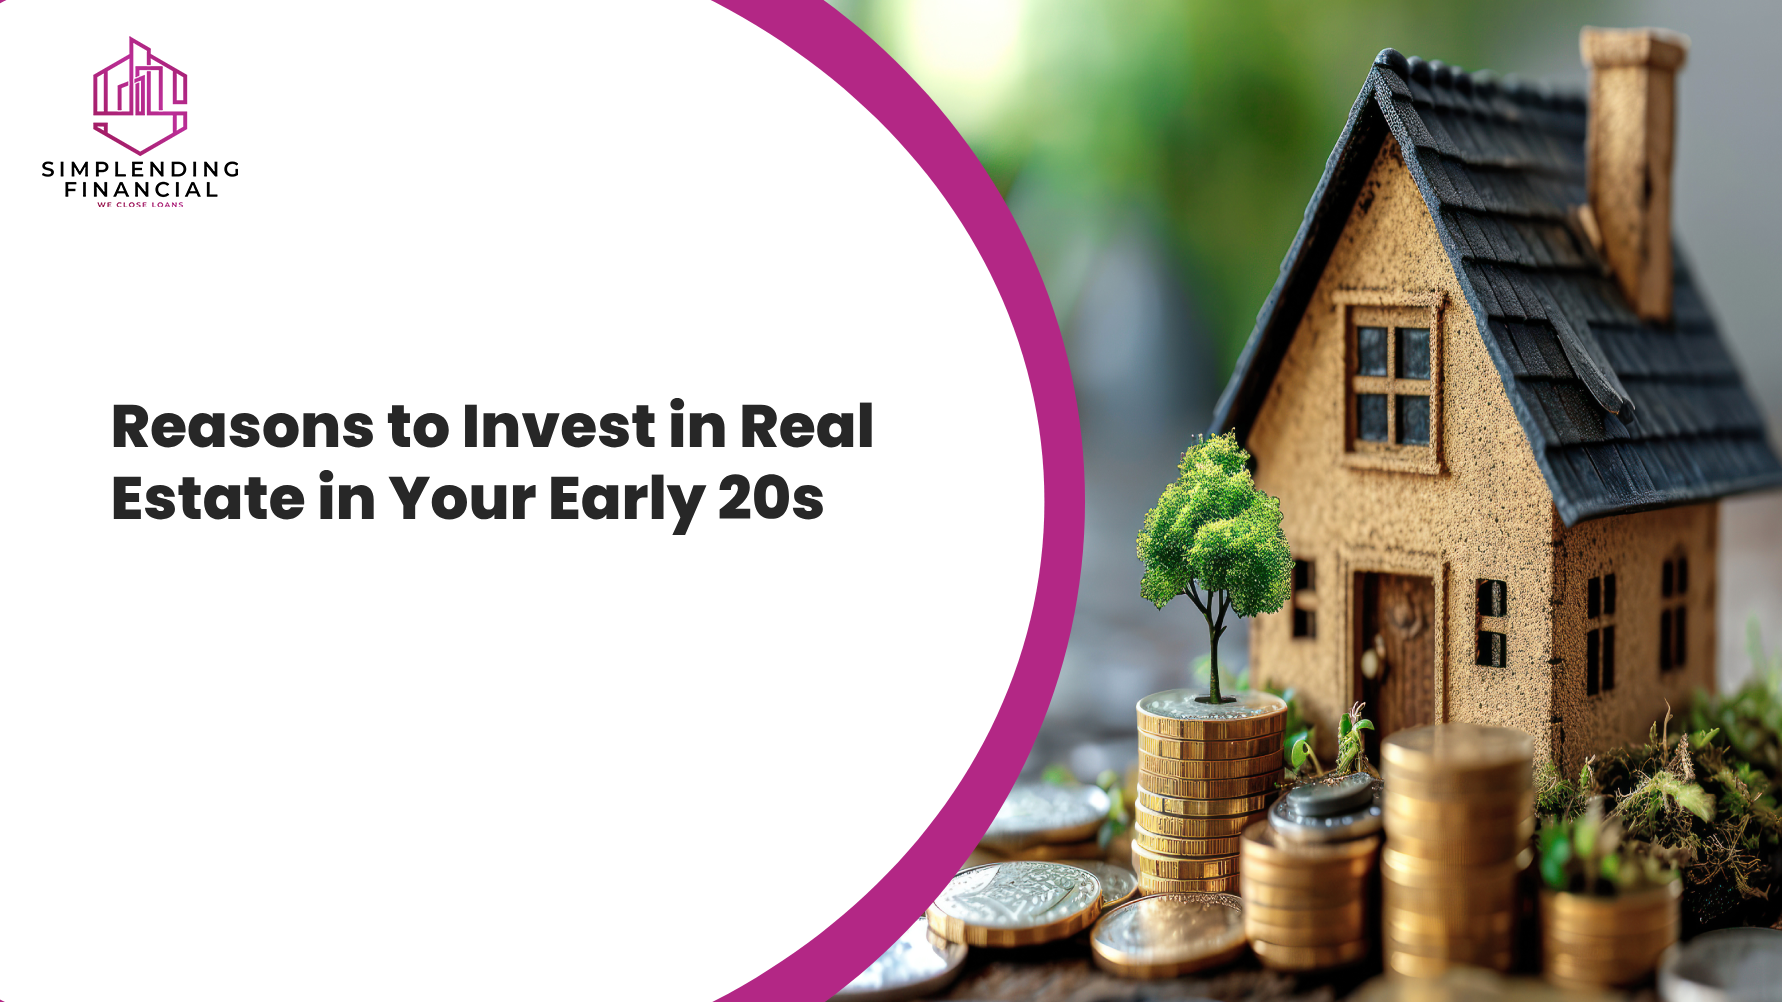 Reasons to Invest in Real Estate in Your Early 20s